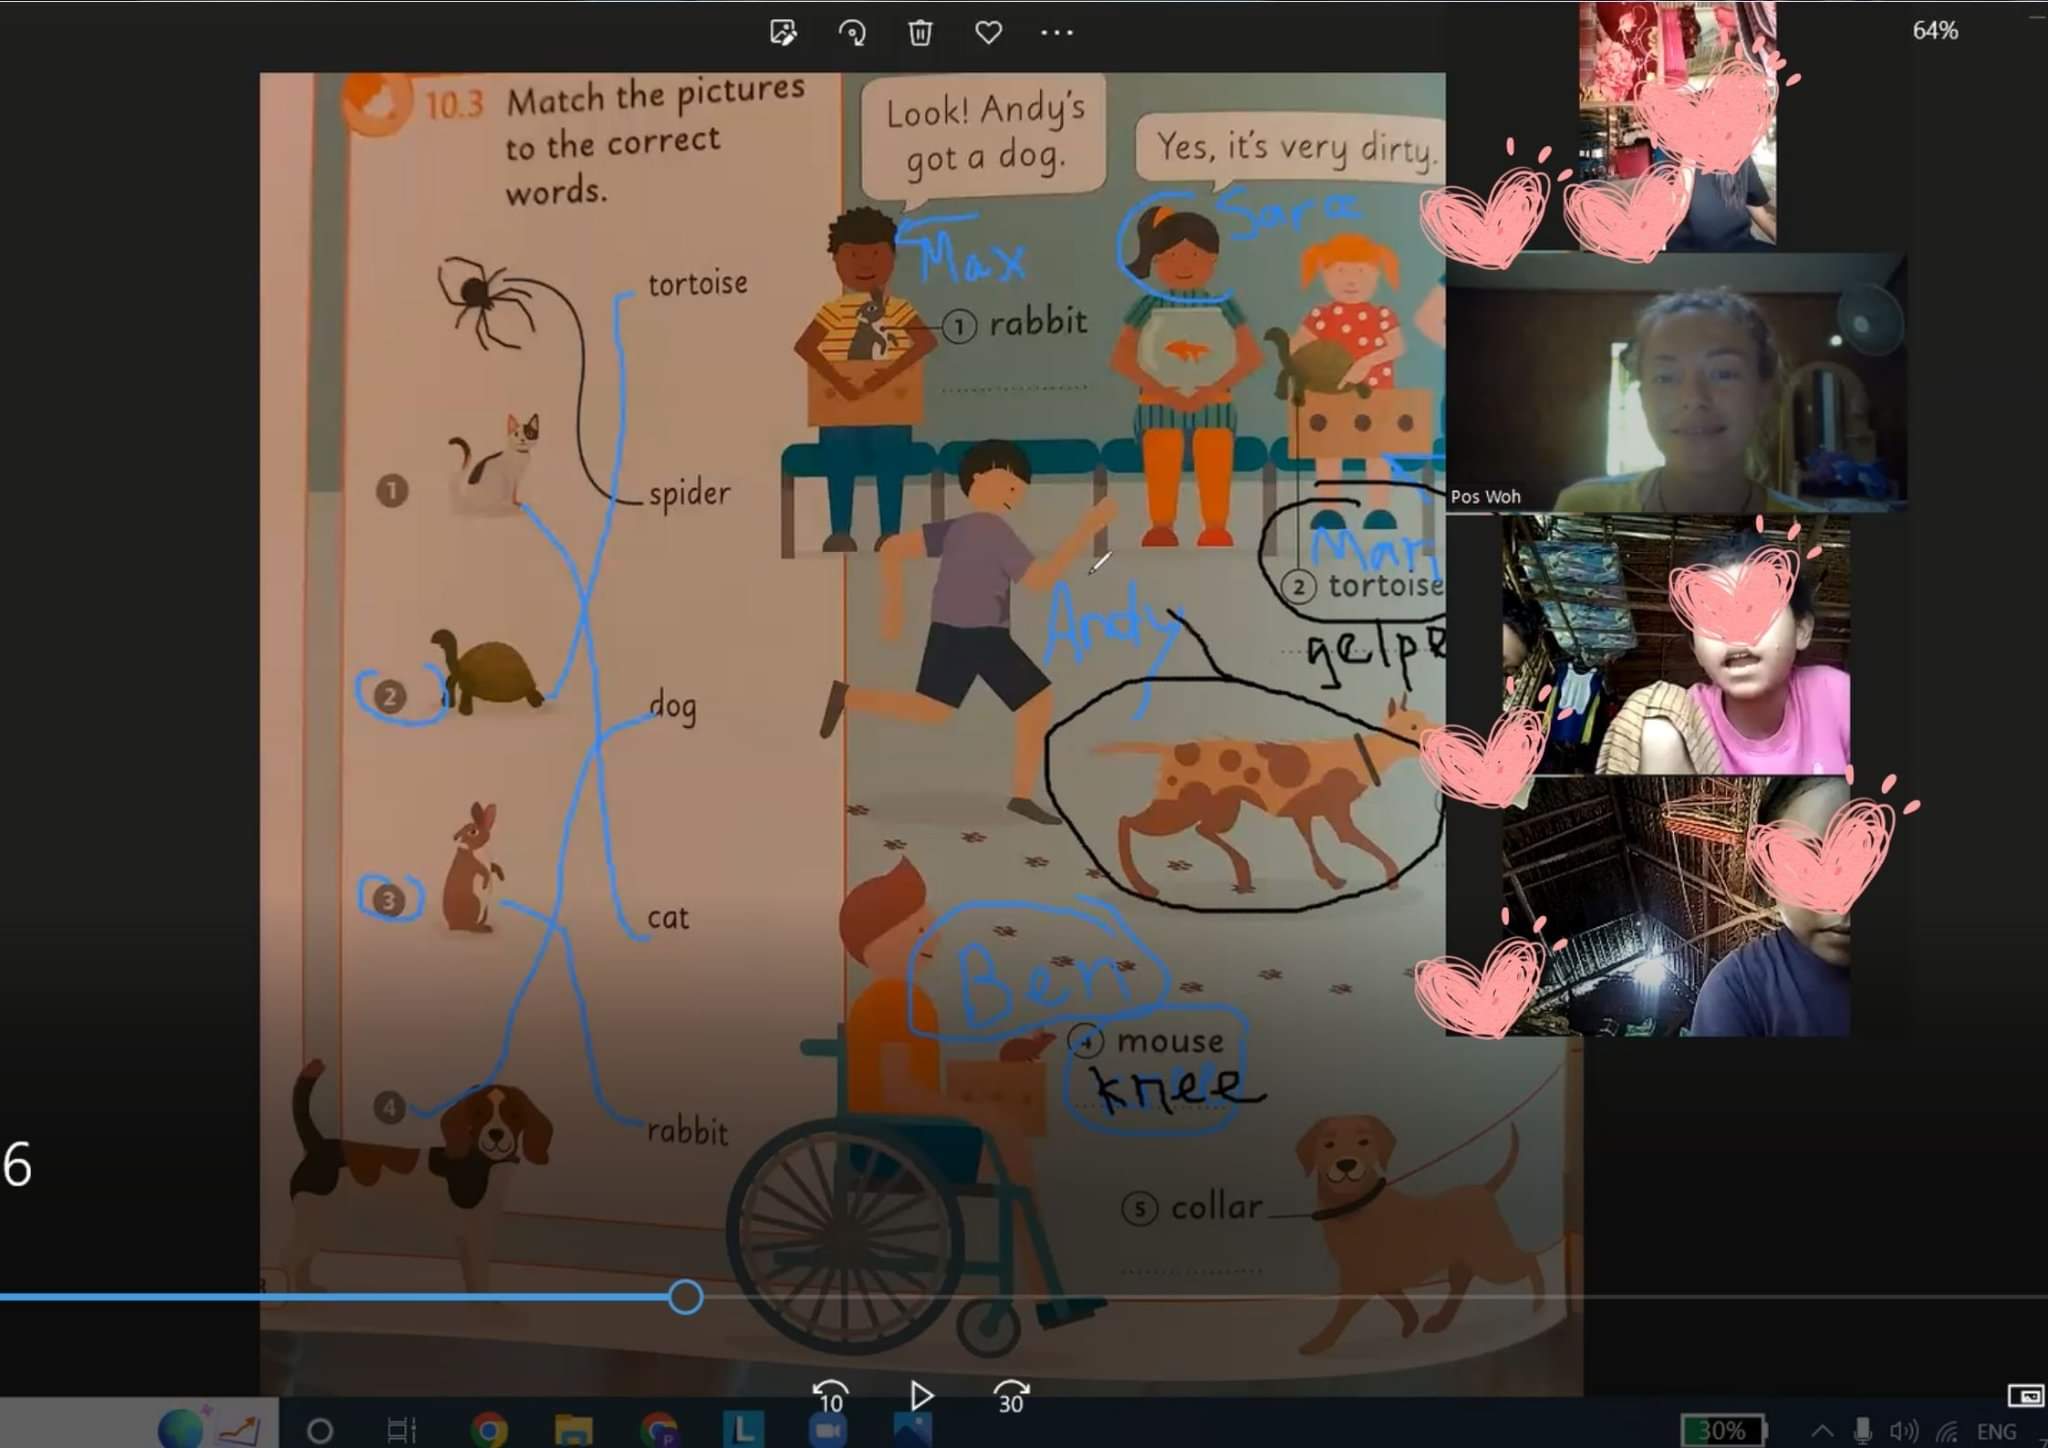 An online English class conducted by a Russian woman with Semai students who have their faces censored. The learning material is asking to match the pictures to the correct words where one column shows various animals and the other column writes; tortoise, spider, dog, cat, rabbit.